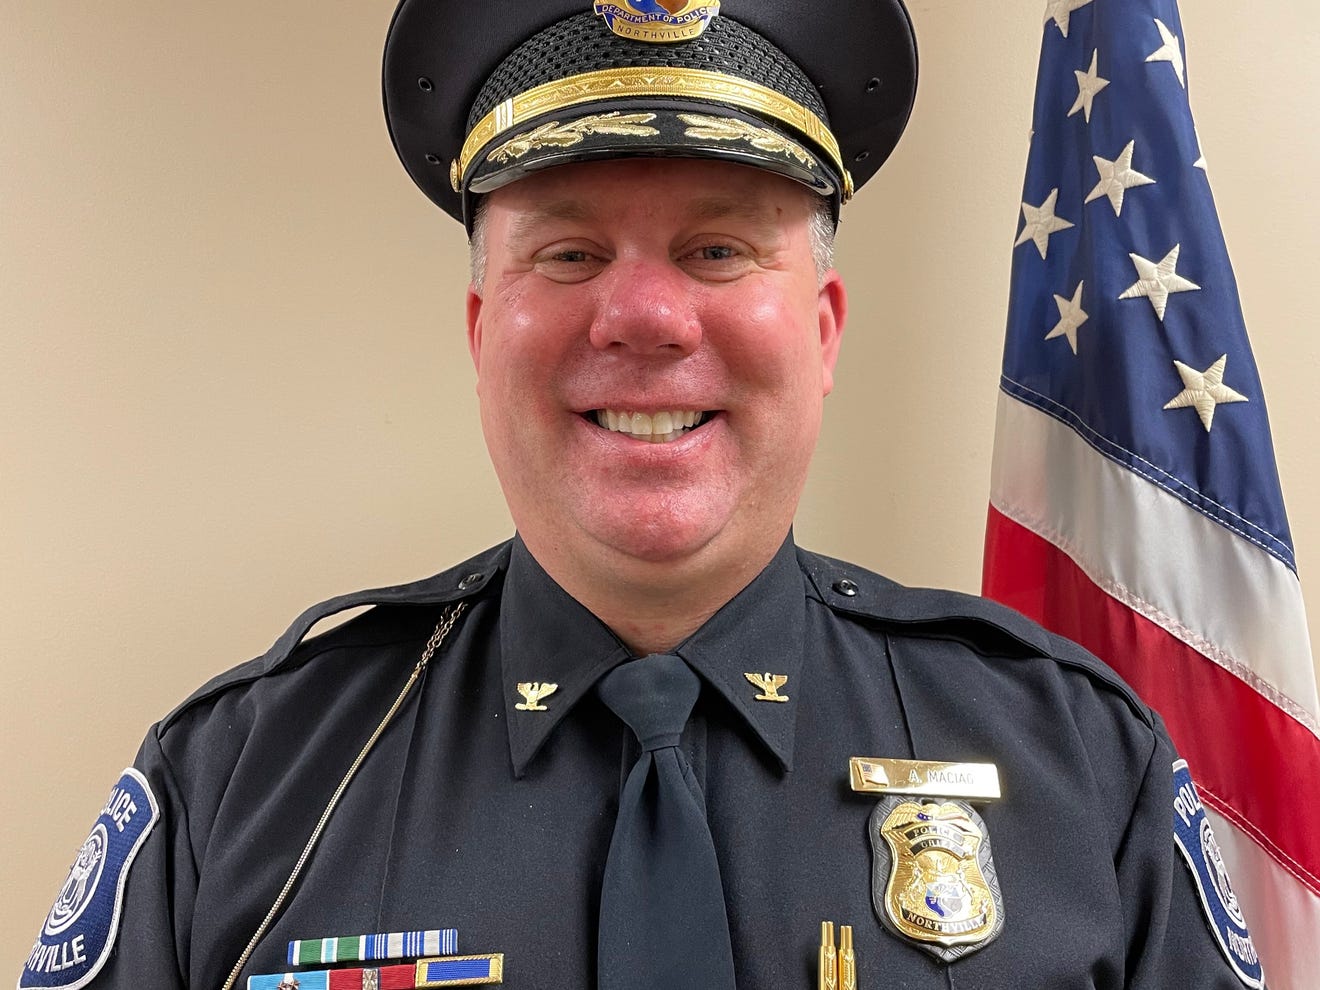 Northville police chief elected president of two police associations